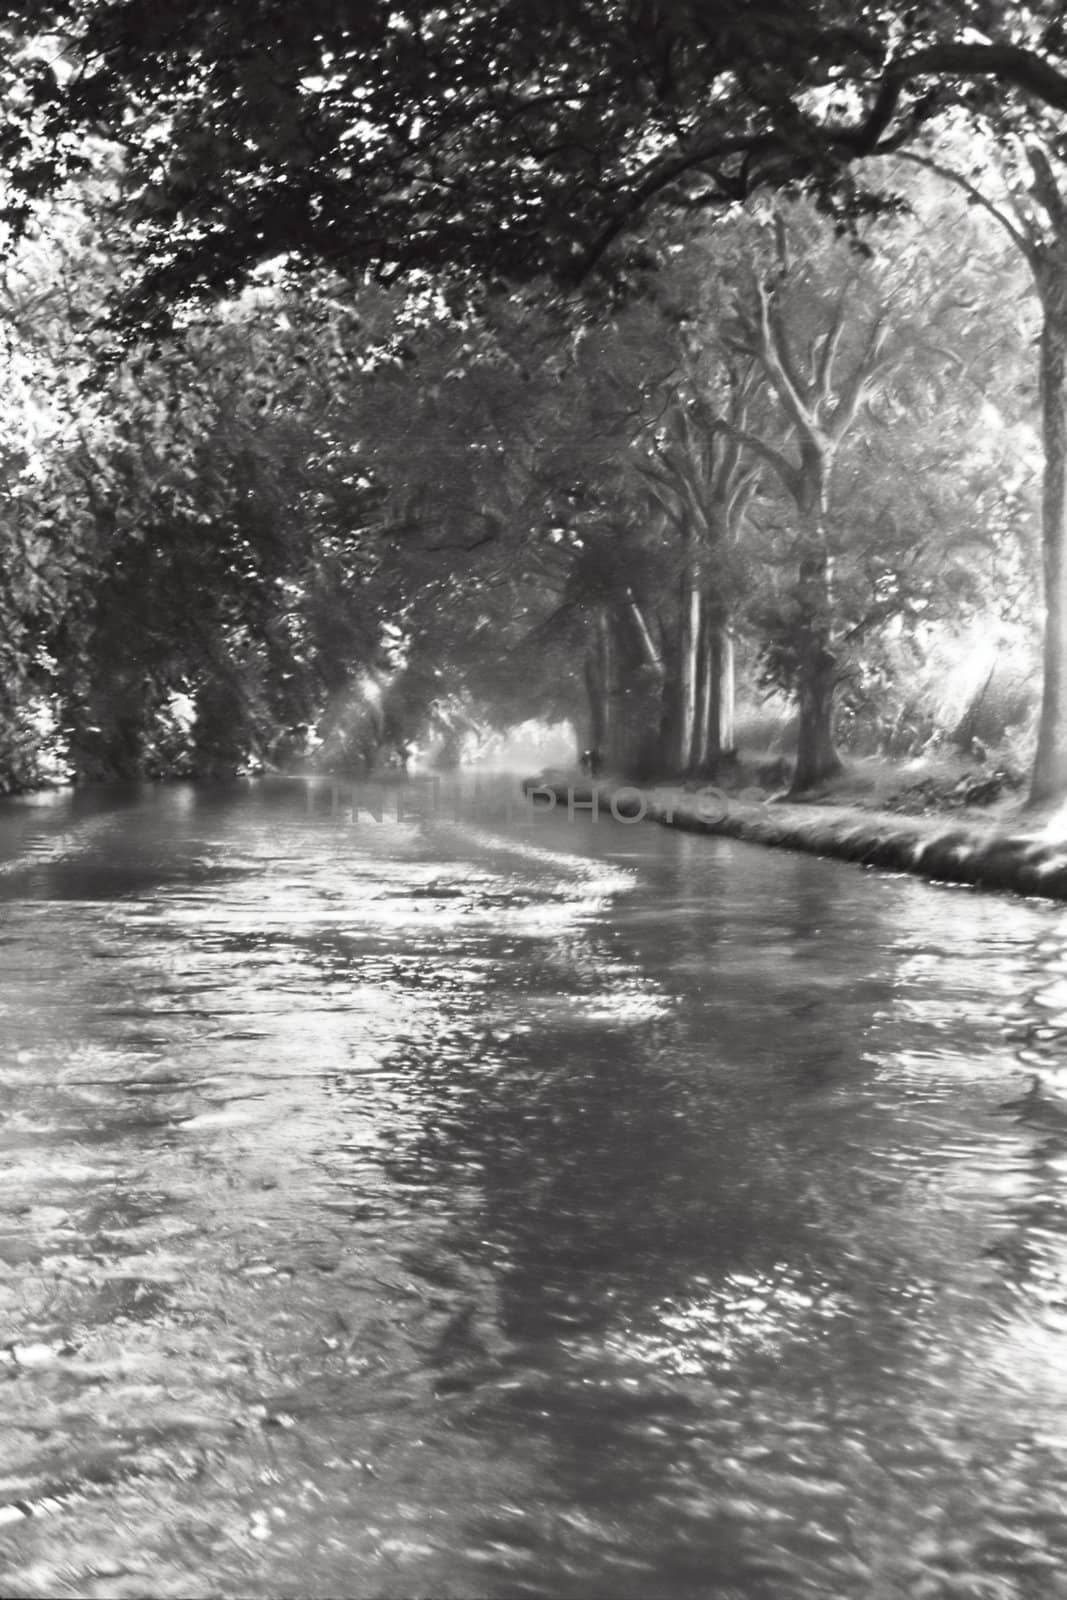 b/w image of Canal du Midi in southern France, Europe, taken from middle of canal, softened to give it a dream-like feel